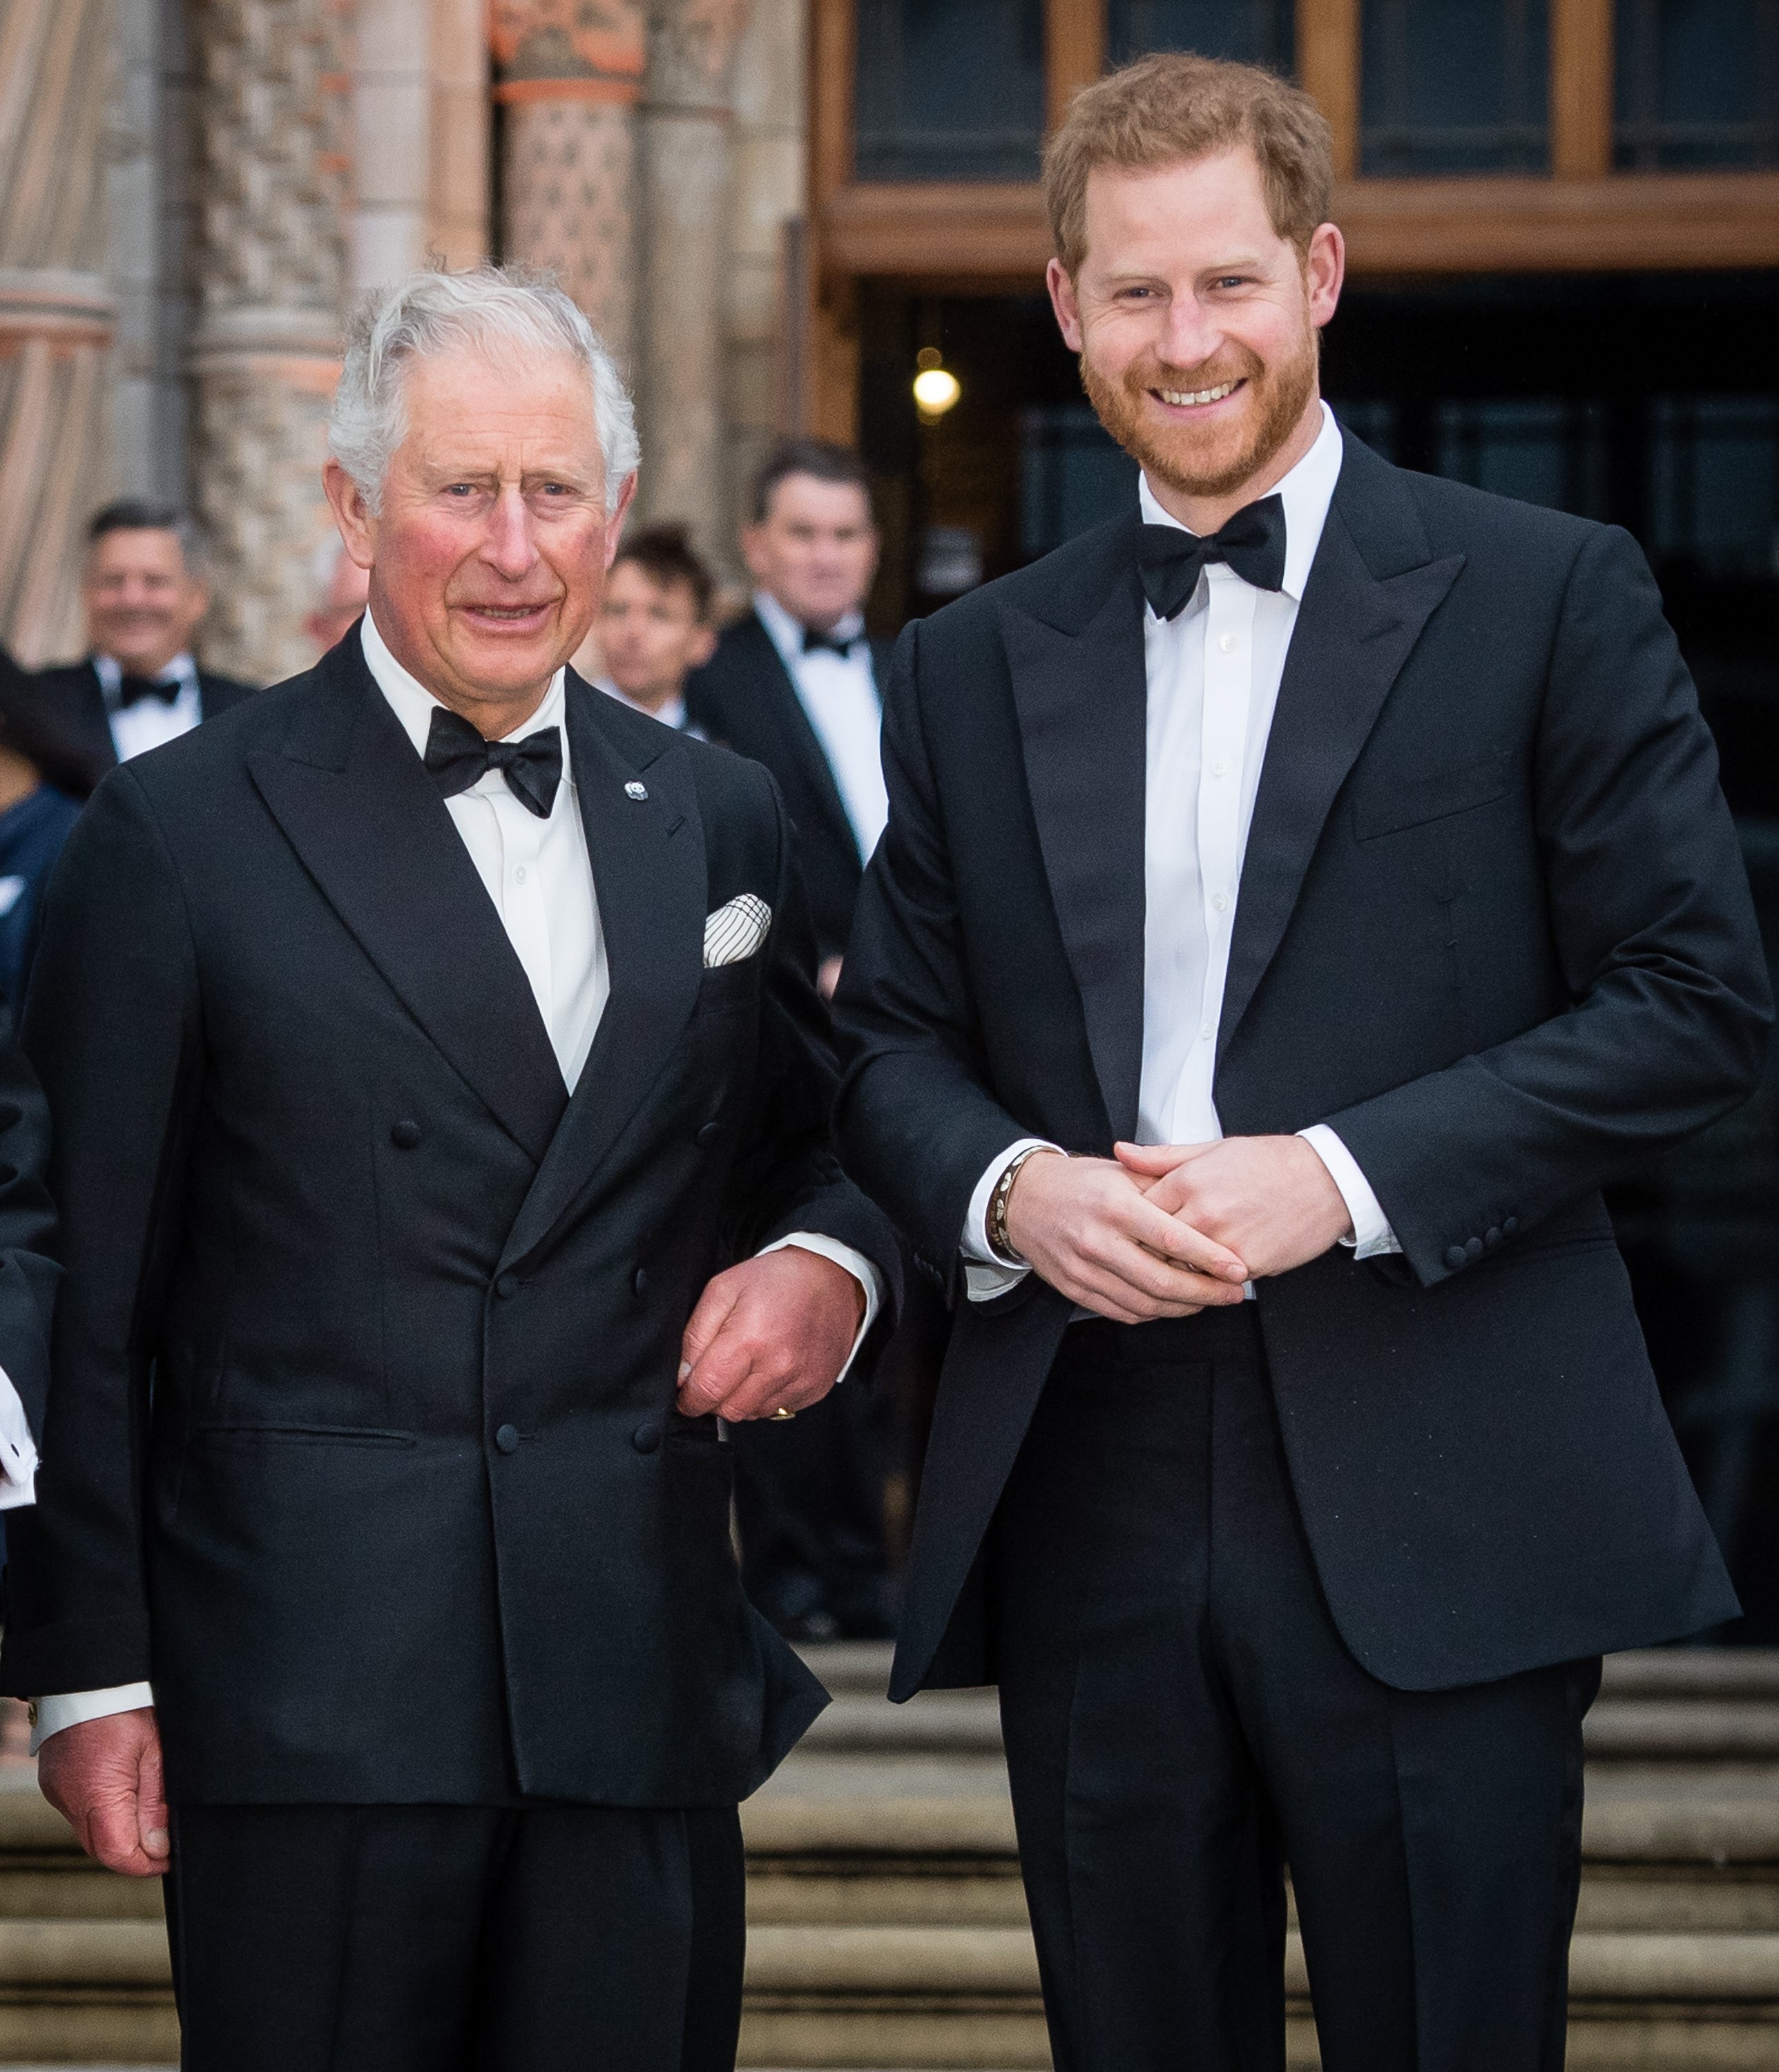 Prince Harry and King Charles III in London 2019. | Source: Getty Images